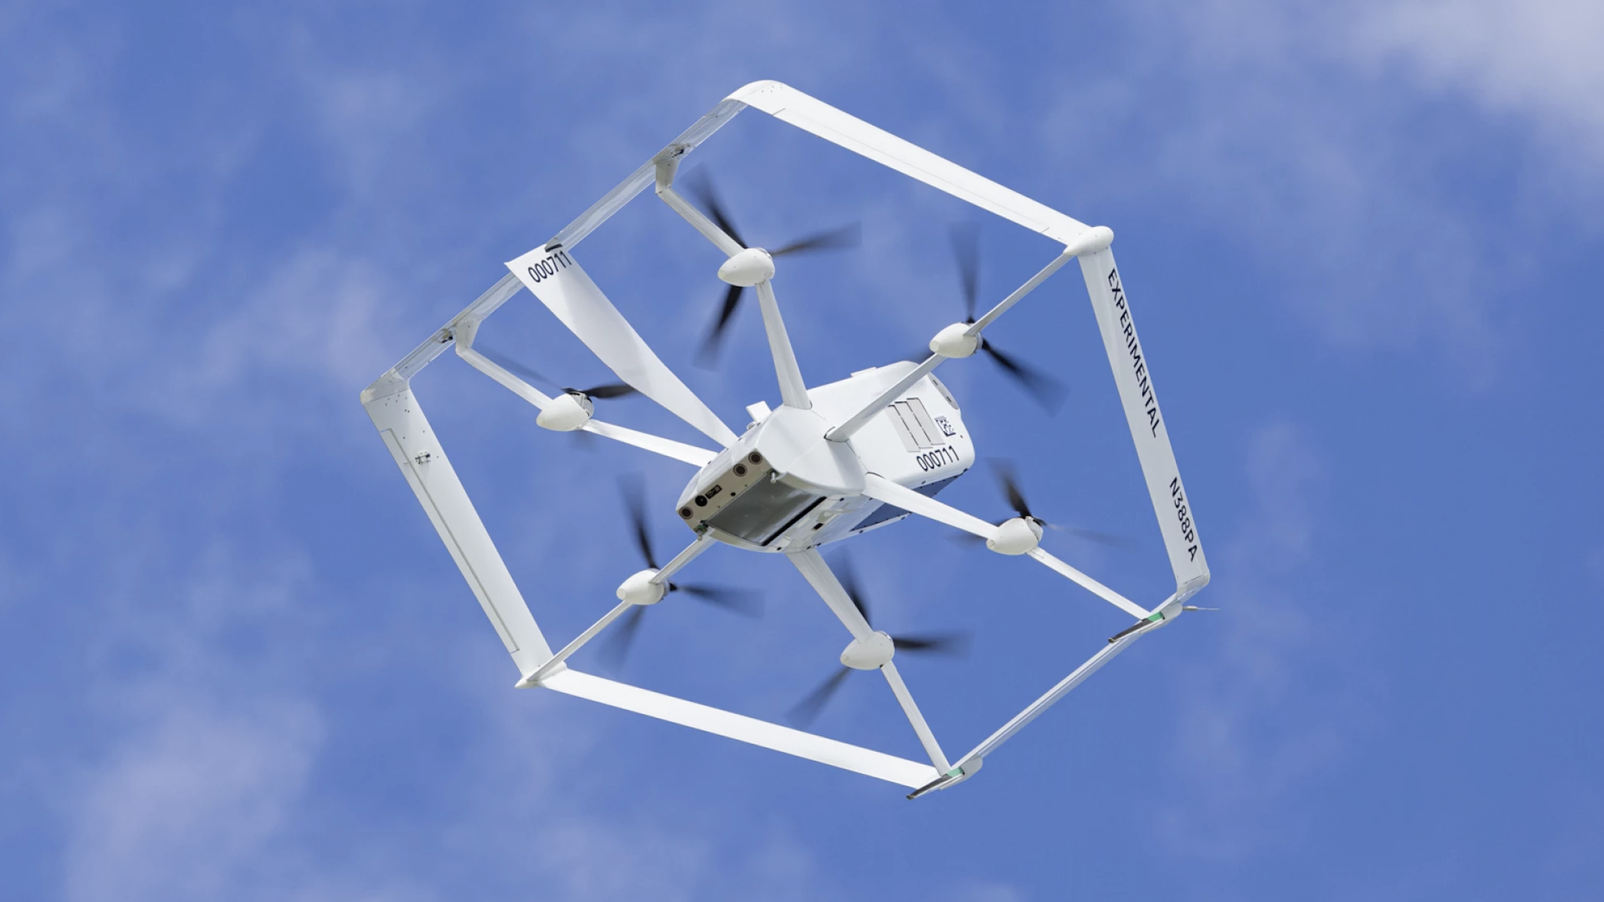 White Amazon MK-27 2 drone flying with blue sky and clouds behind. The drone is white and has 6 propellers.